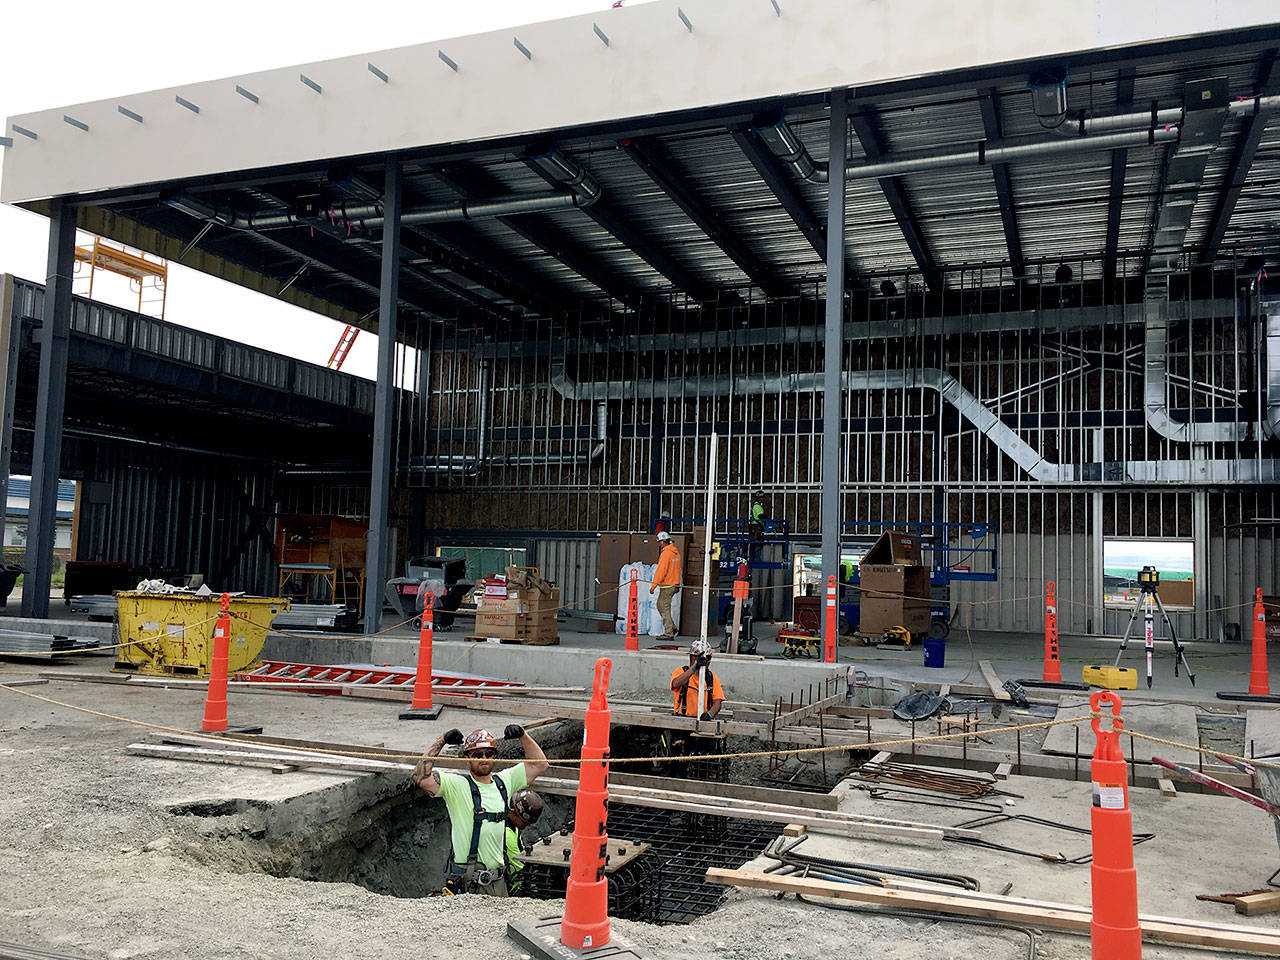 The passenger terminal at Paine Field in Everett is taking shape. (Janice Podsada / The Herald) PHOTO TAKEN 20180517